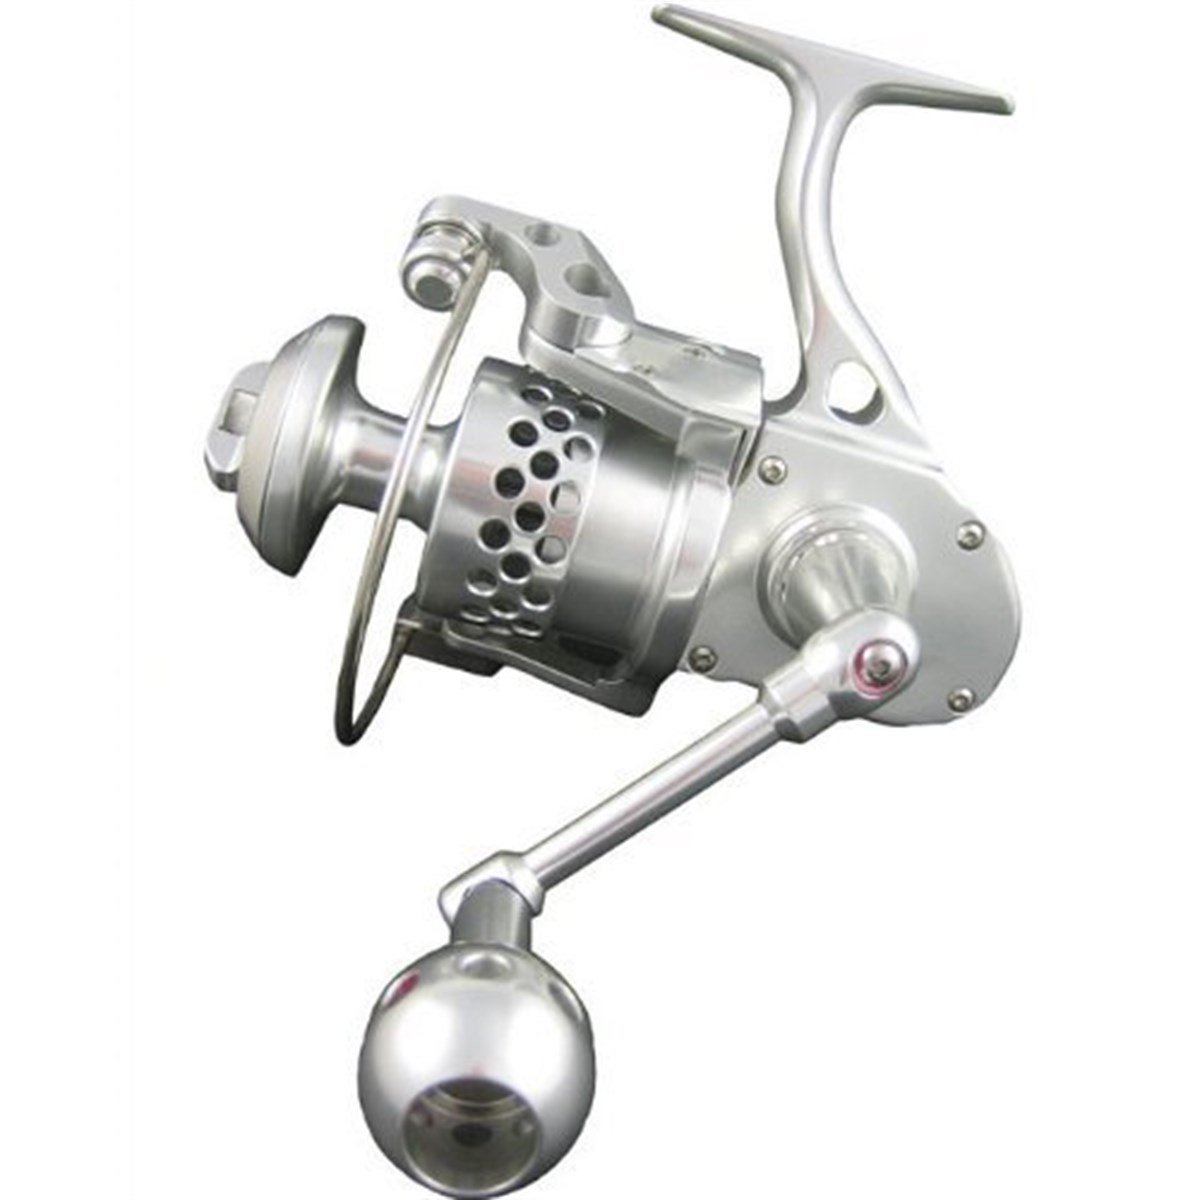 Accurate TwinSpin SR-12 Spinning Reel